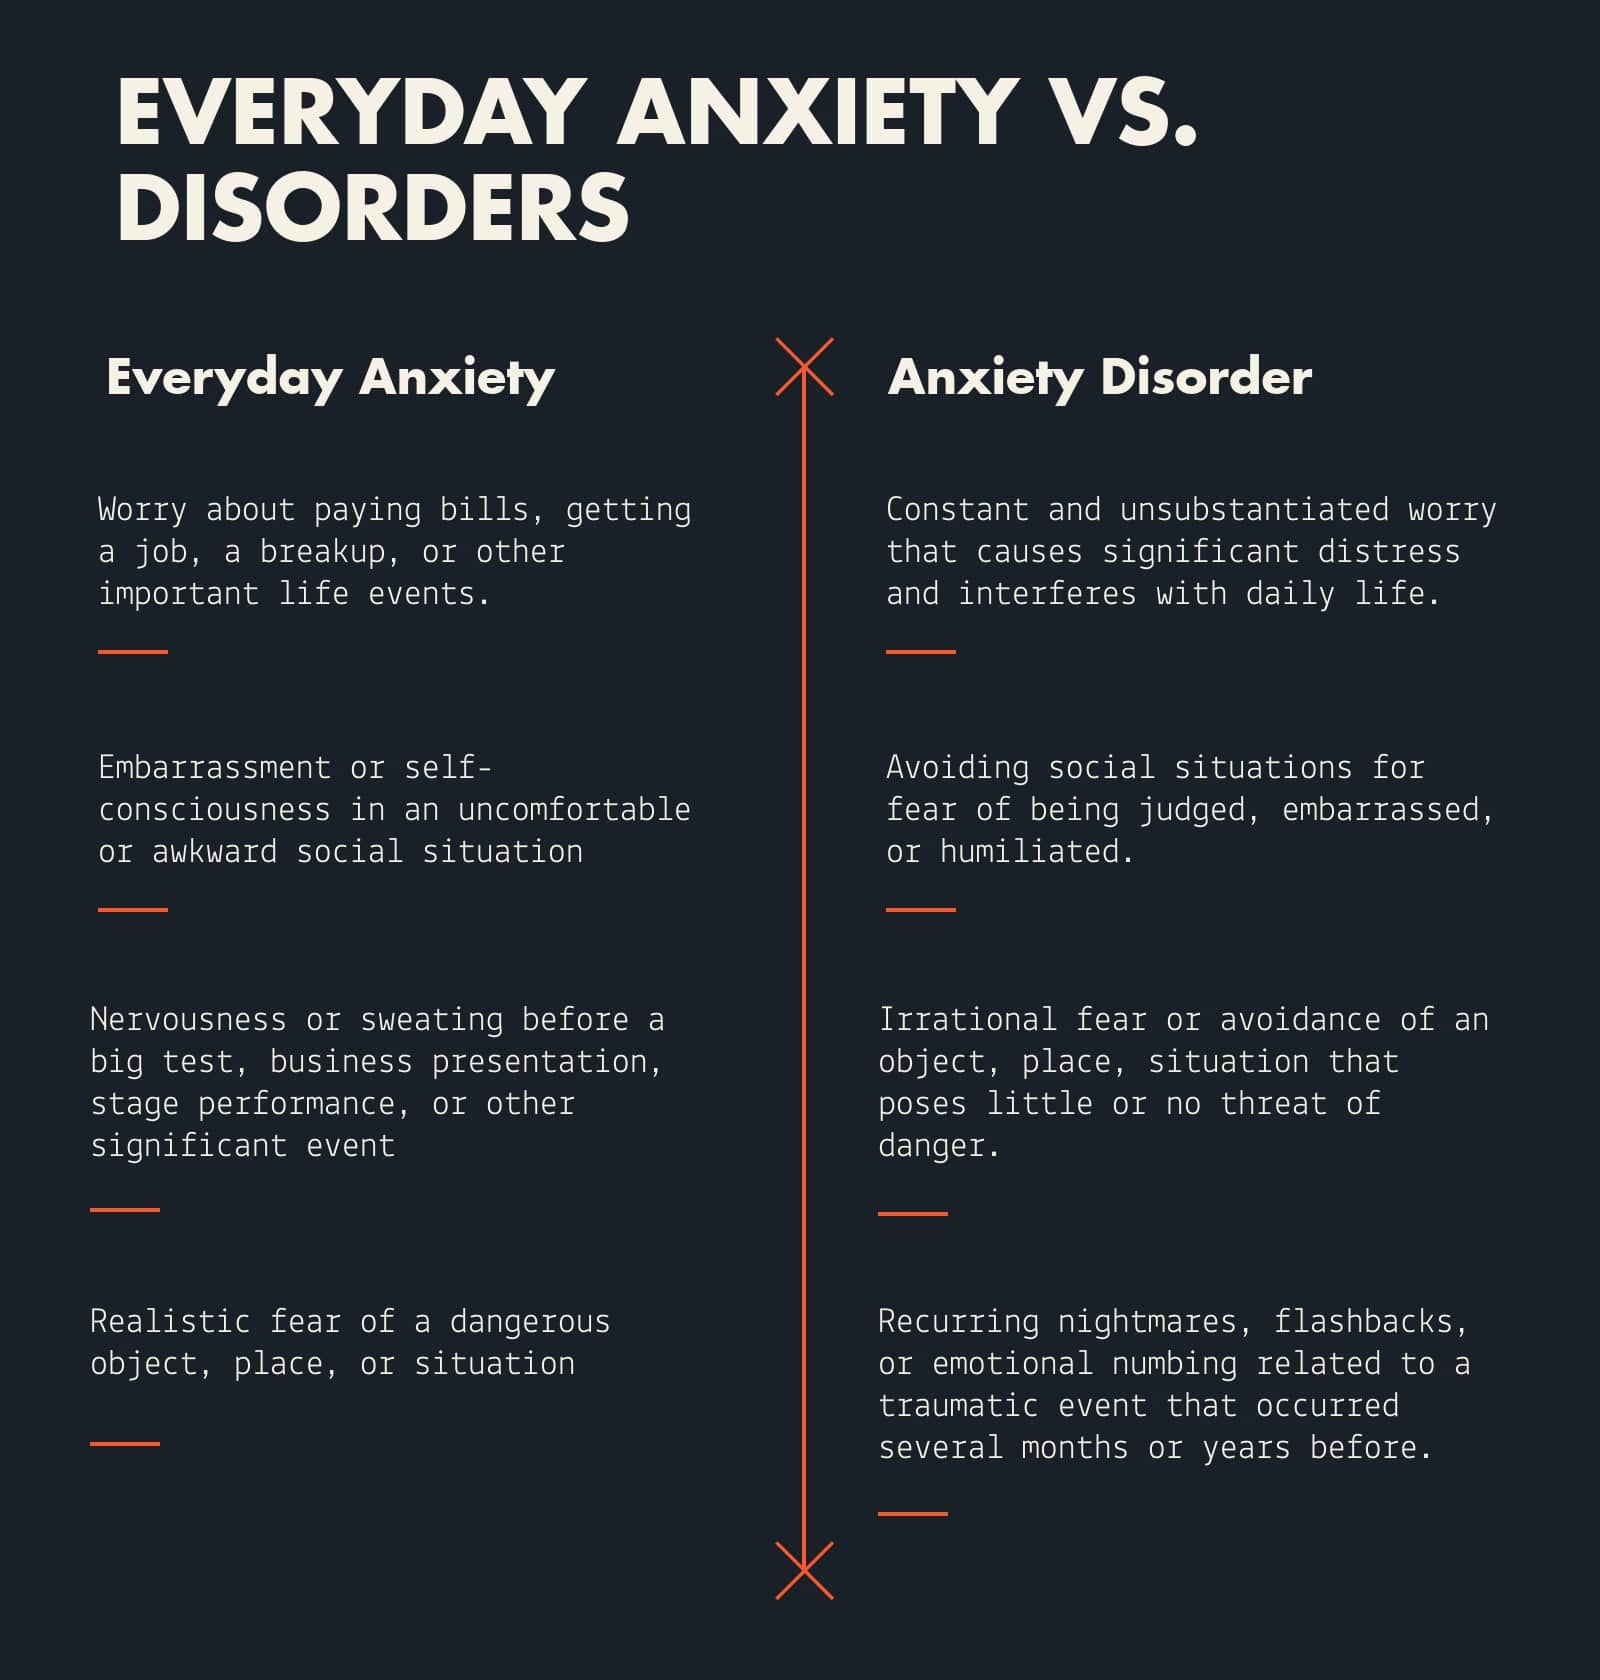 everyday anxiety vs. anxiety disorder